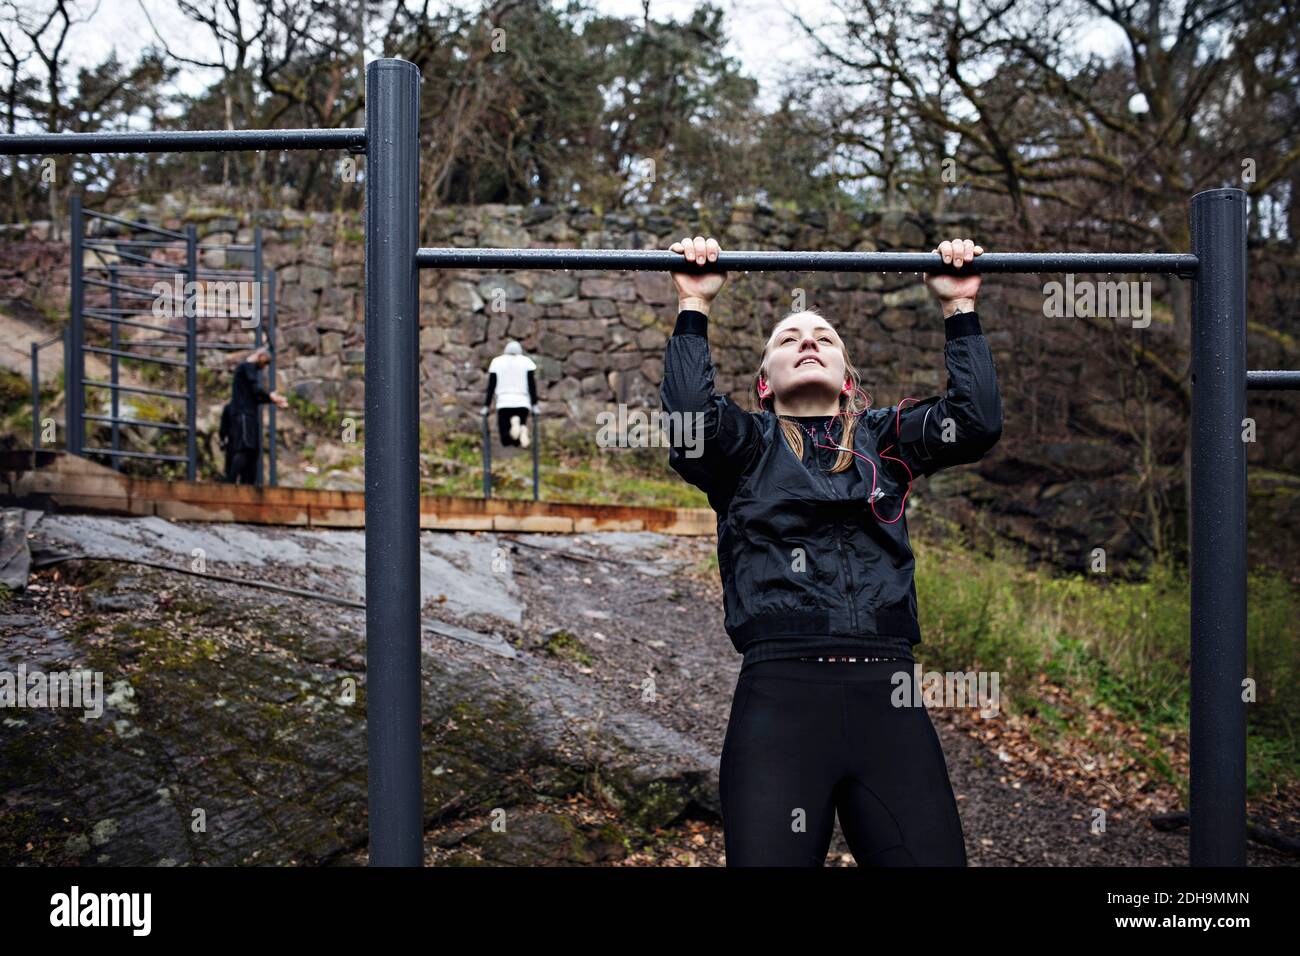 Young woman doing chin-ups exercise at outdoor gym Stock Photo